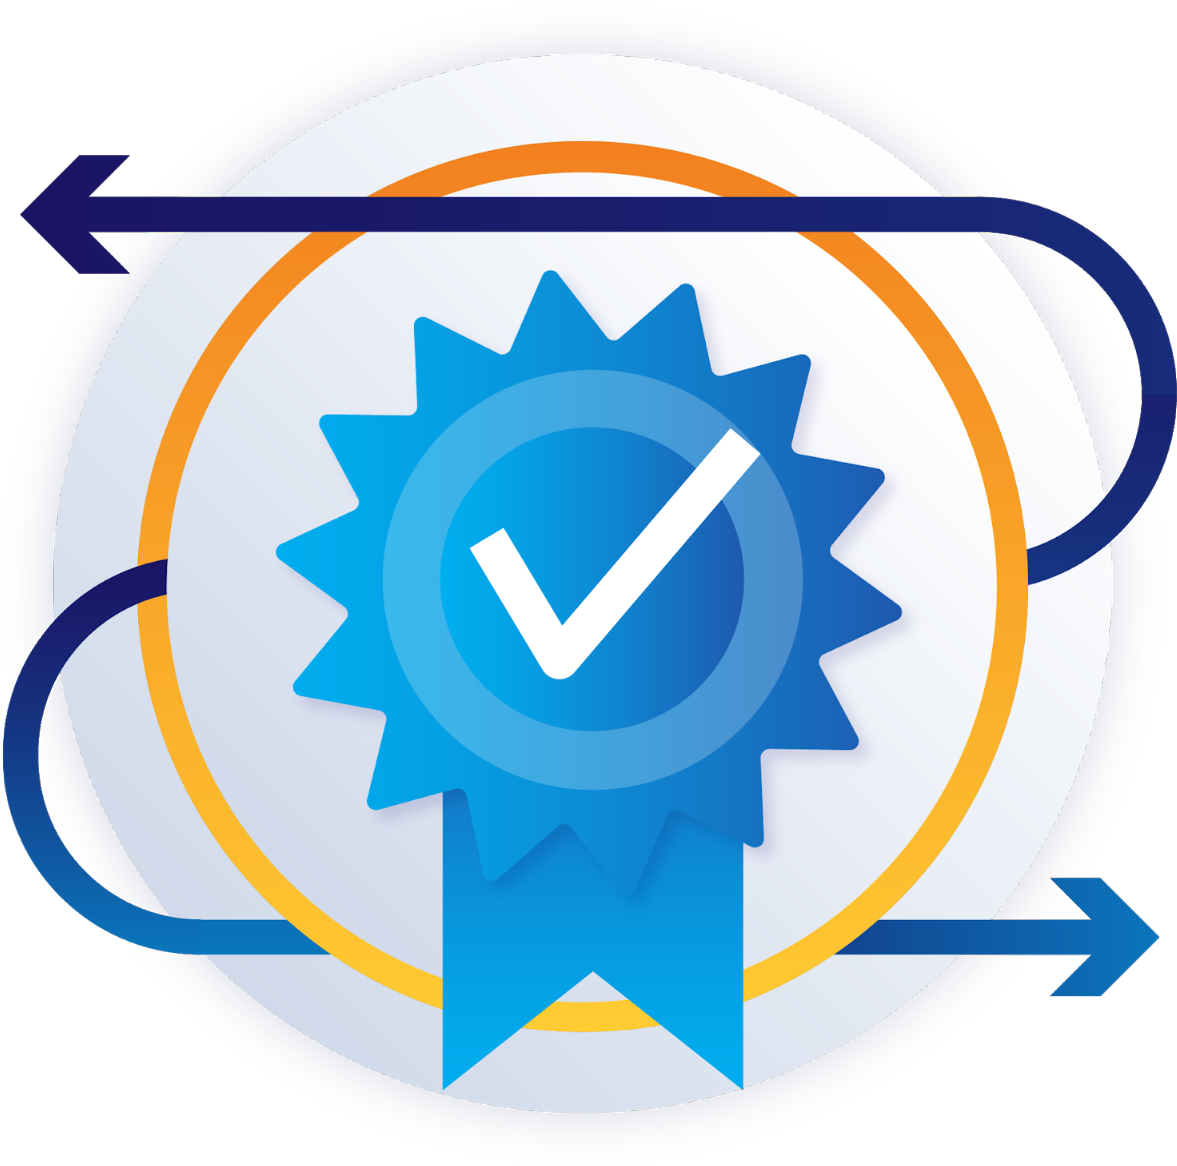 Certification Seal Graphic